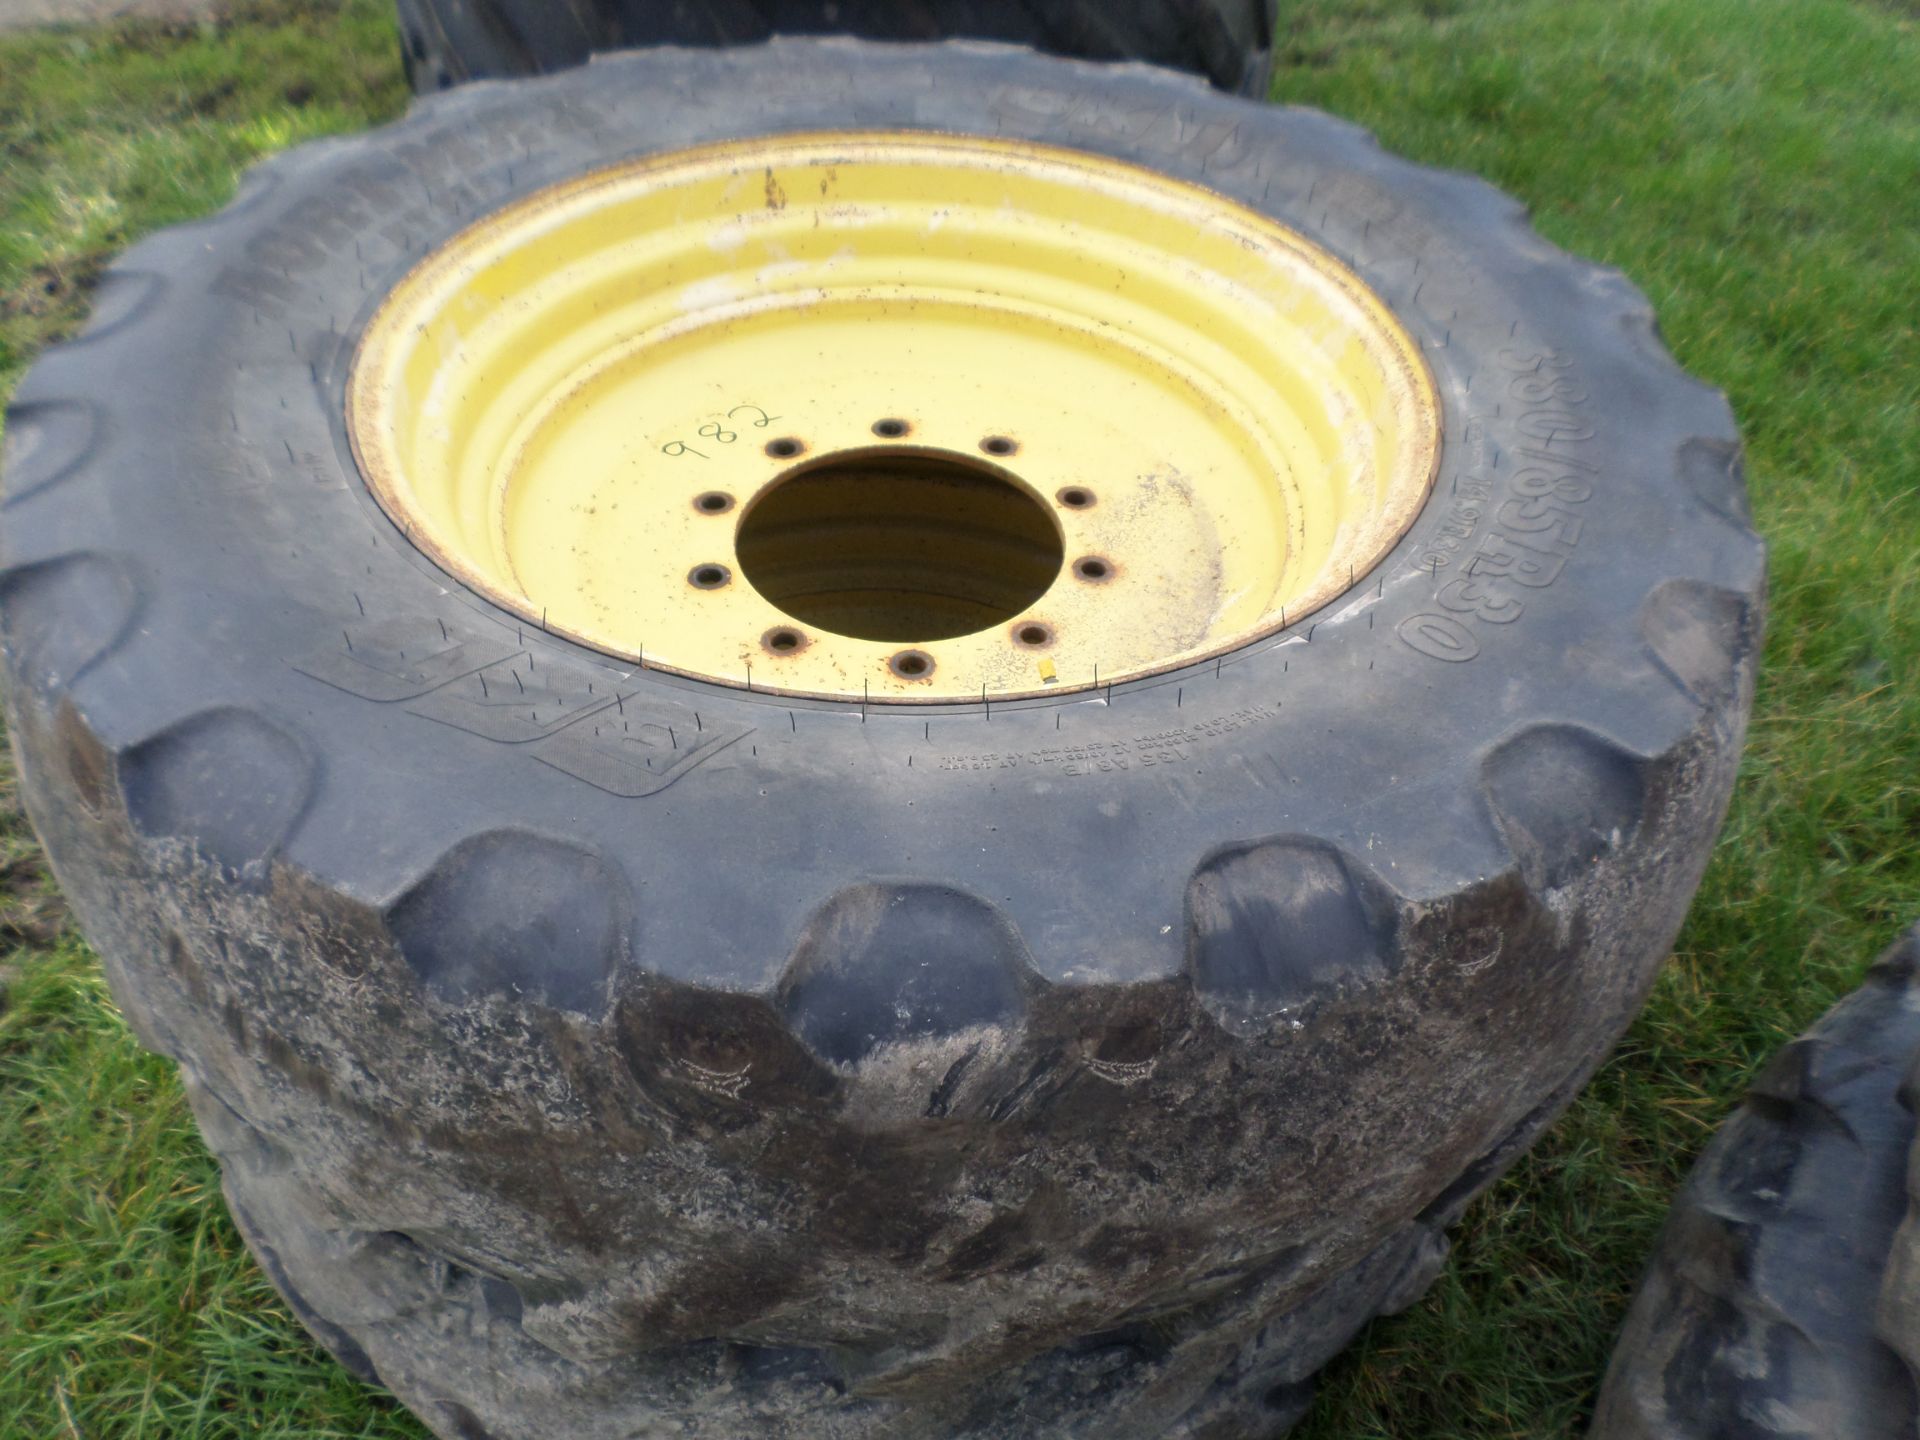 Set of 4 John Deere fixed centre row crop wheels to fit 6020/6030 series, 380/90/46 rears and 380/ - Image 4 of 5